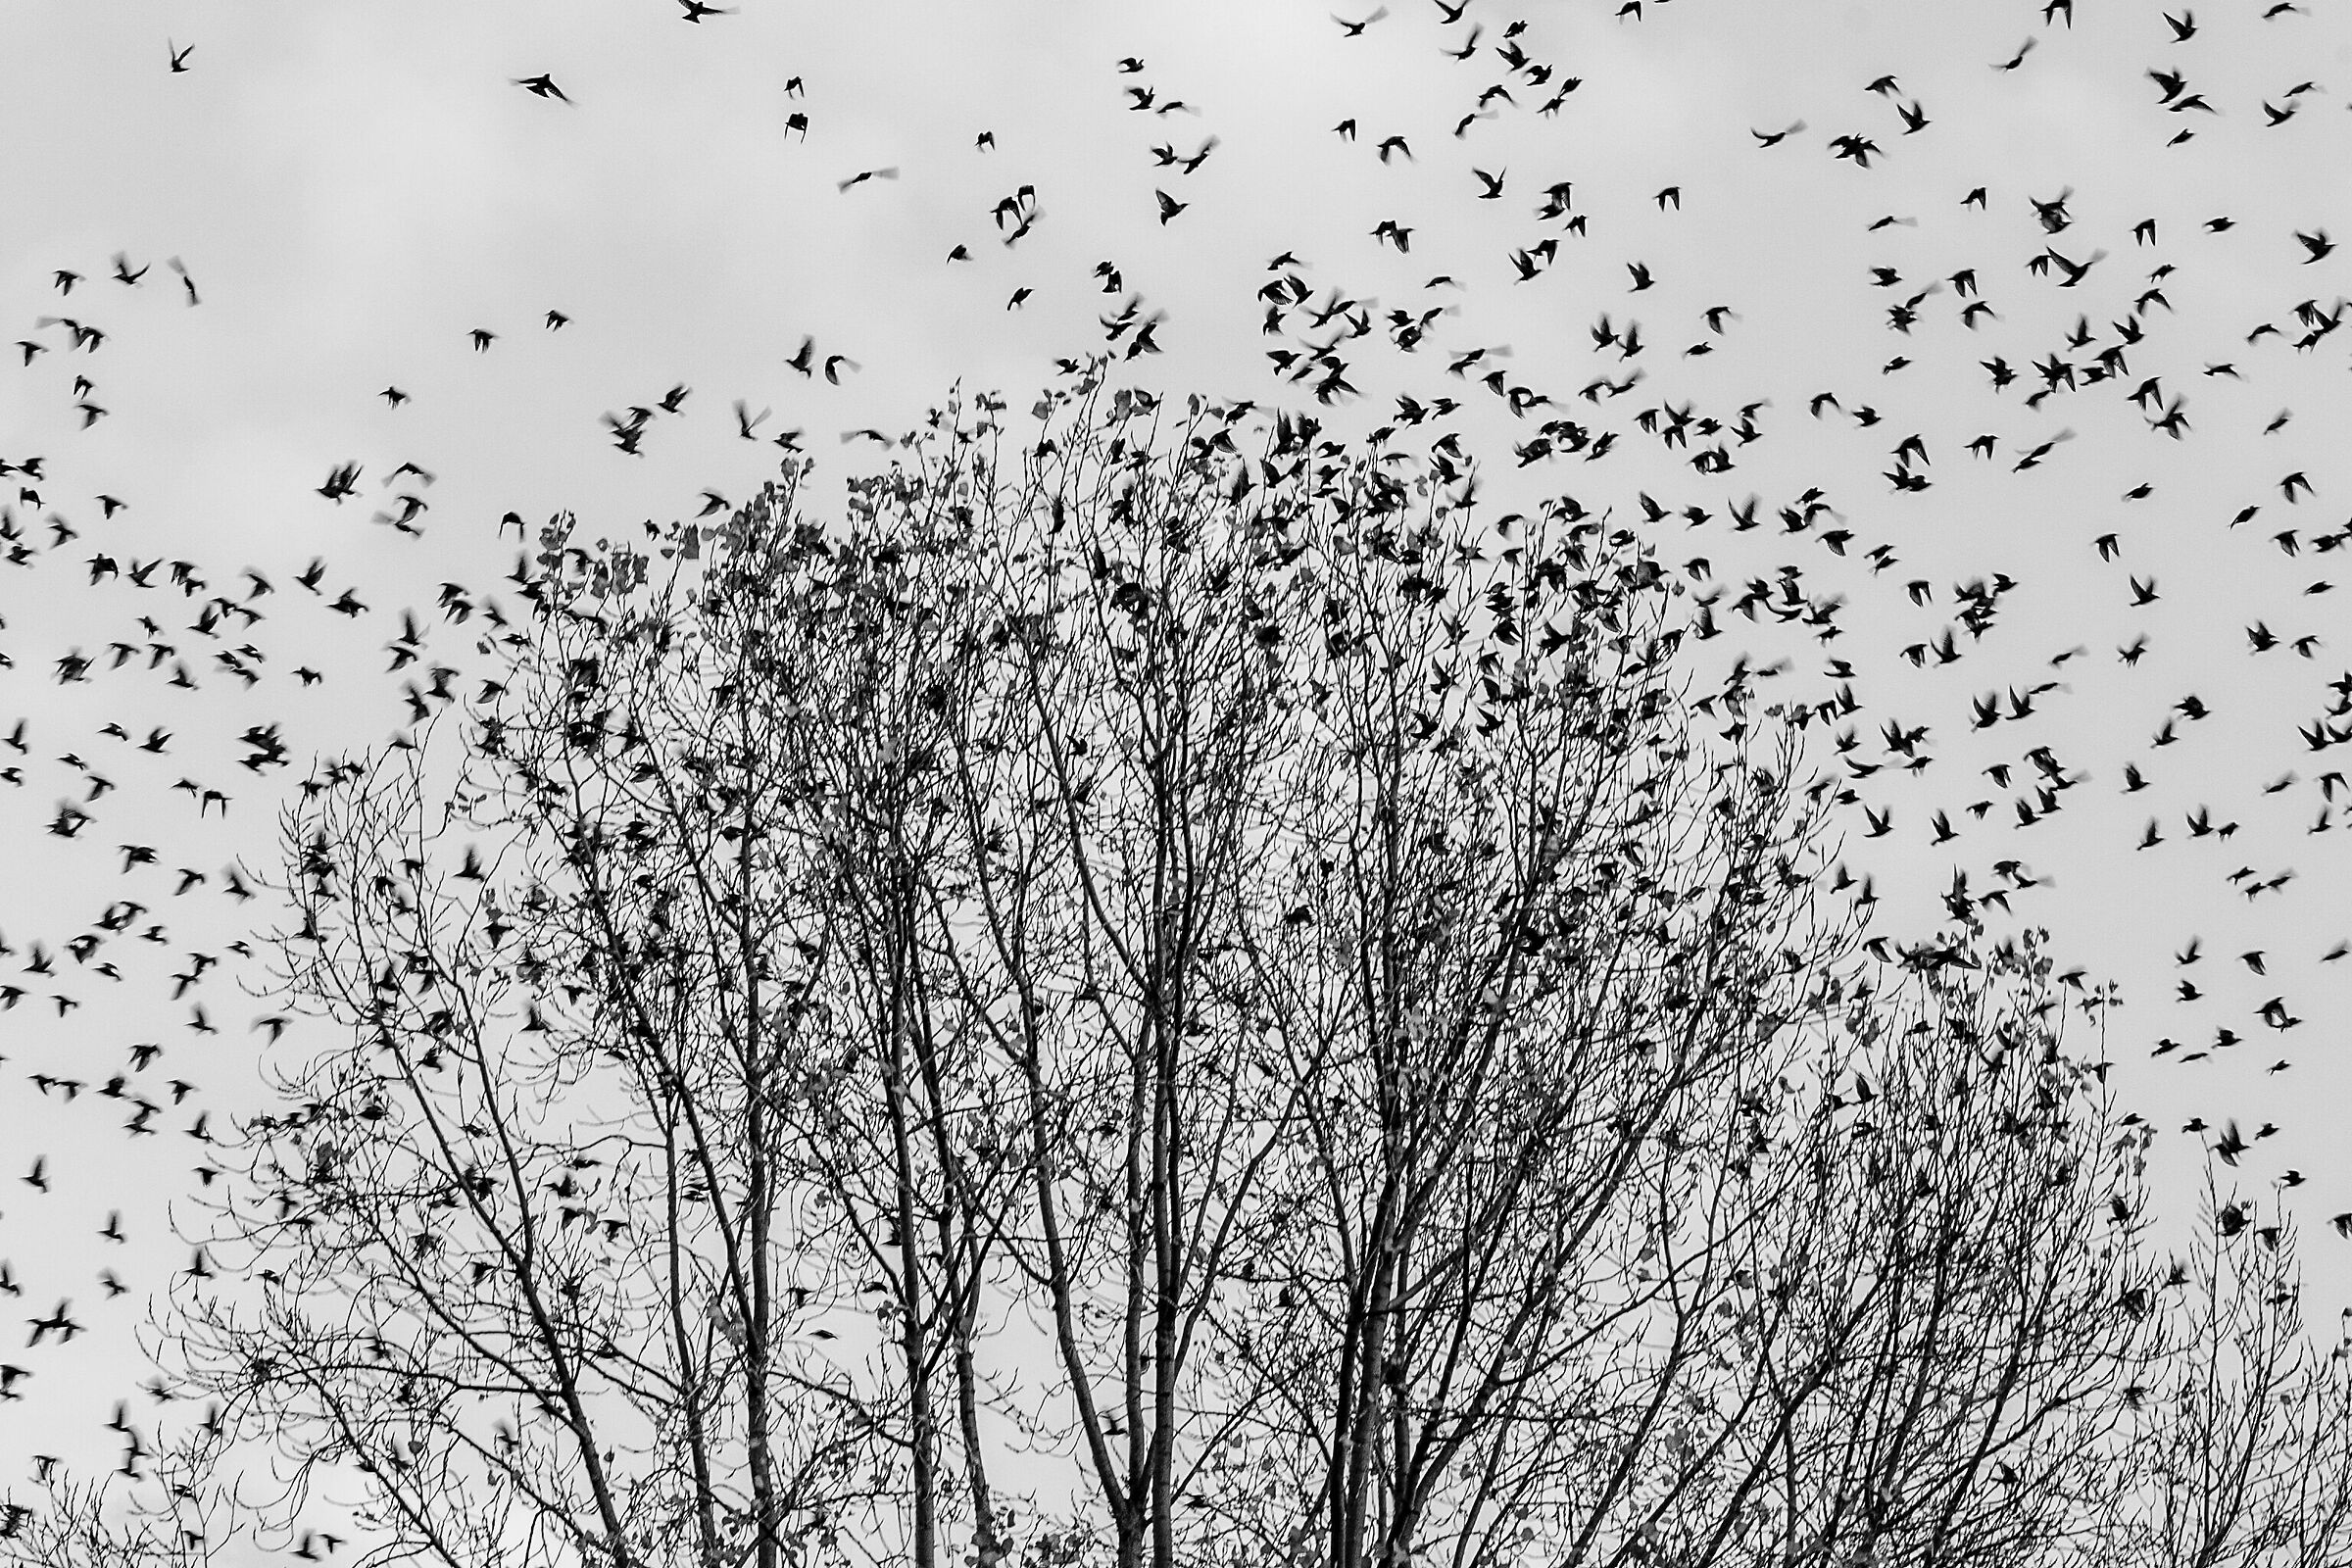 Swallows in swarms...